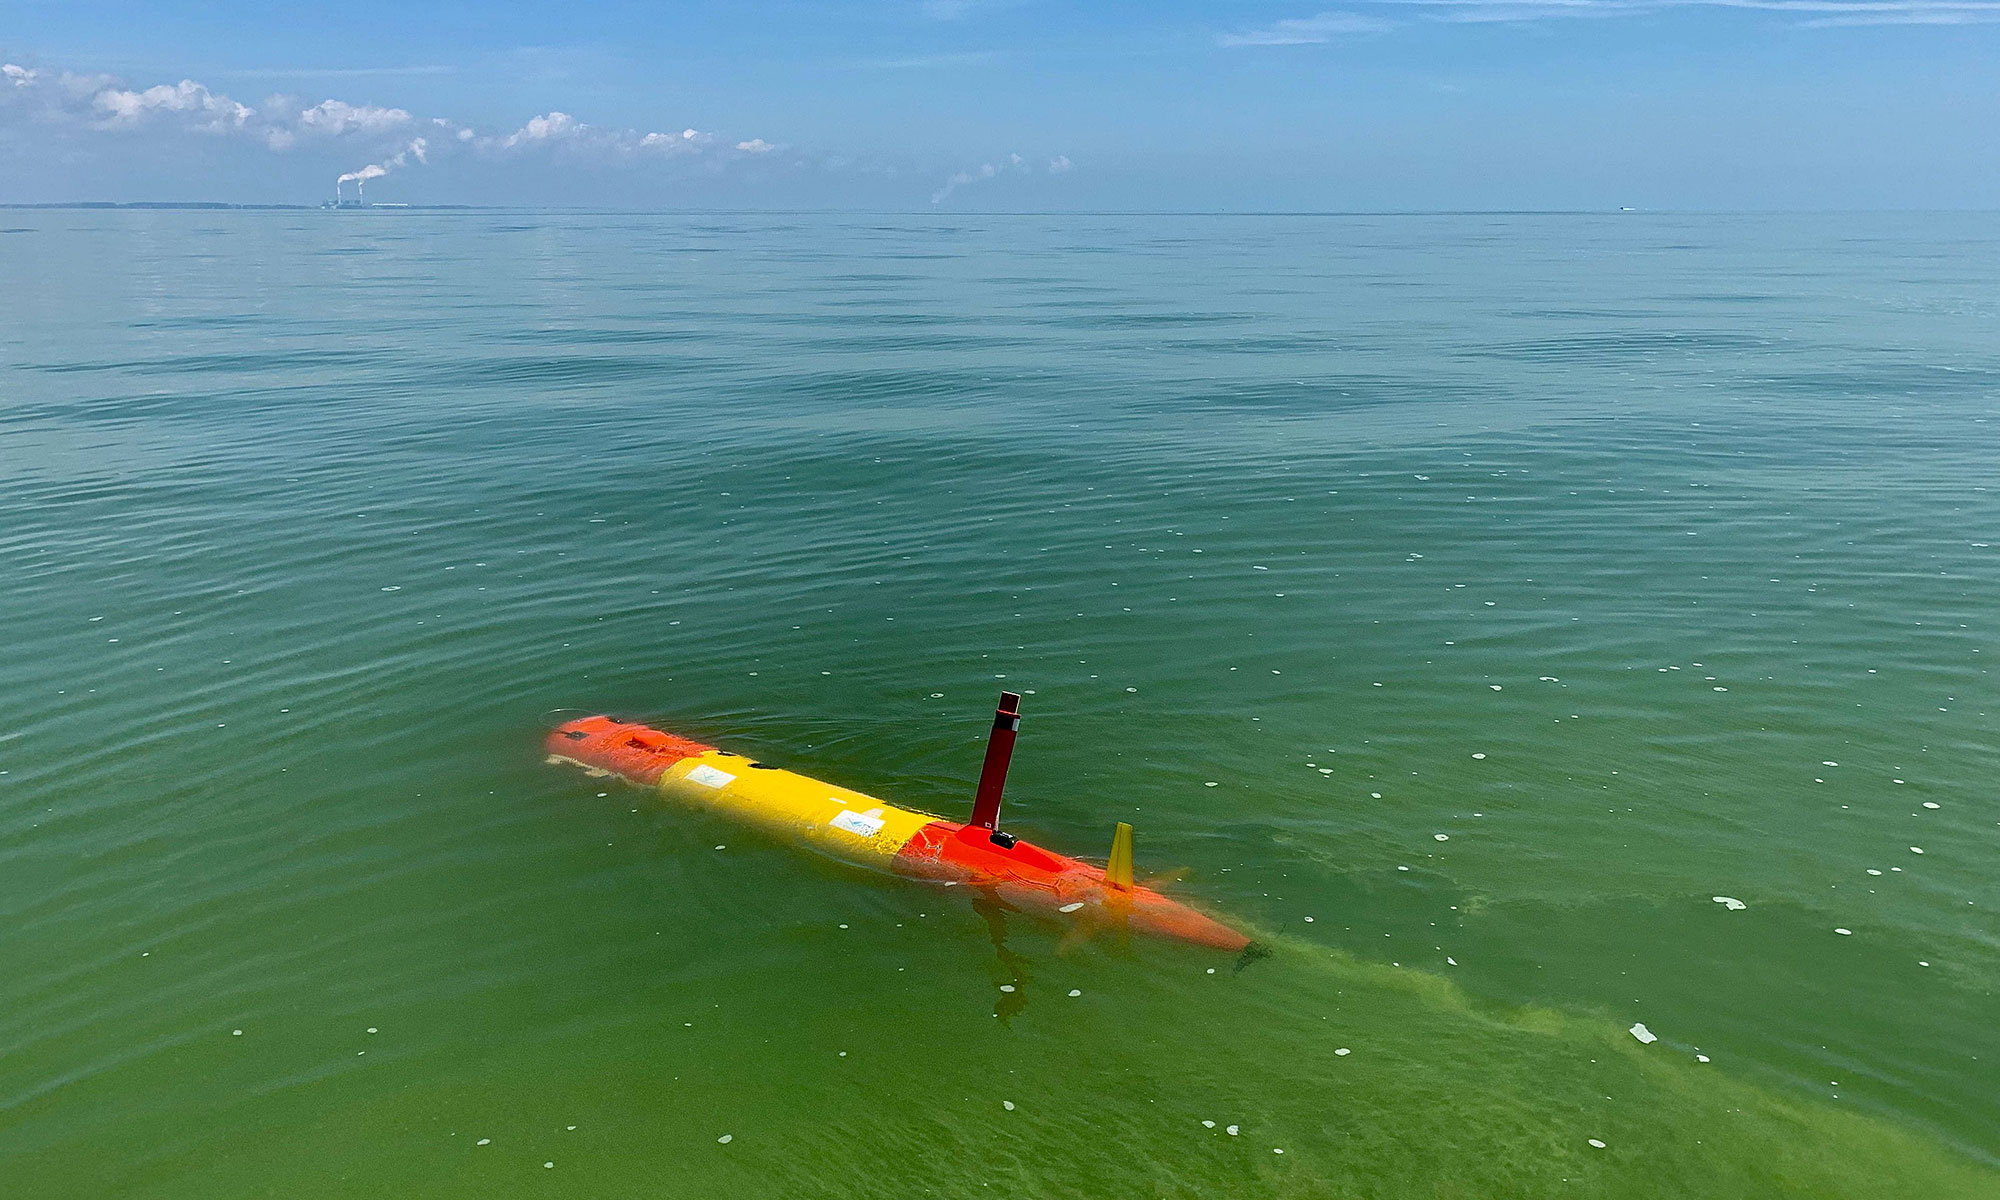 One of MBARI’s long-range autonomous underwater vehicles makes its way through the 2019 harmful algal bloom in Lake Erie.